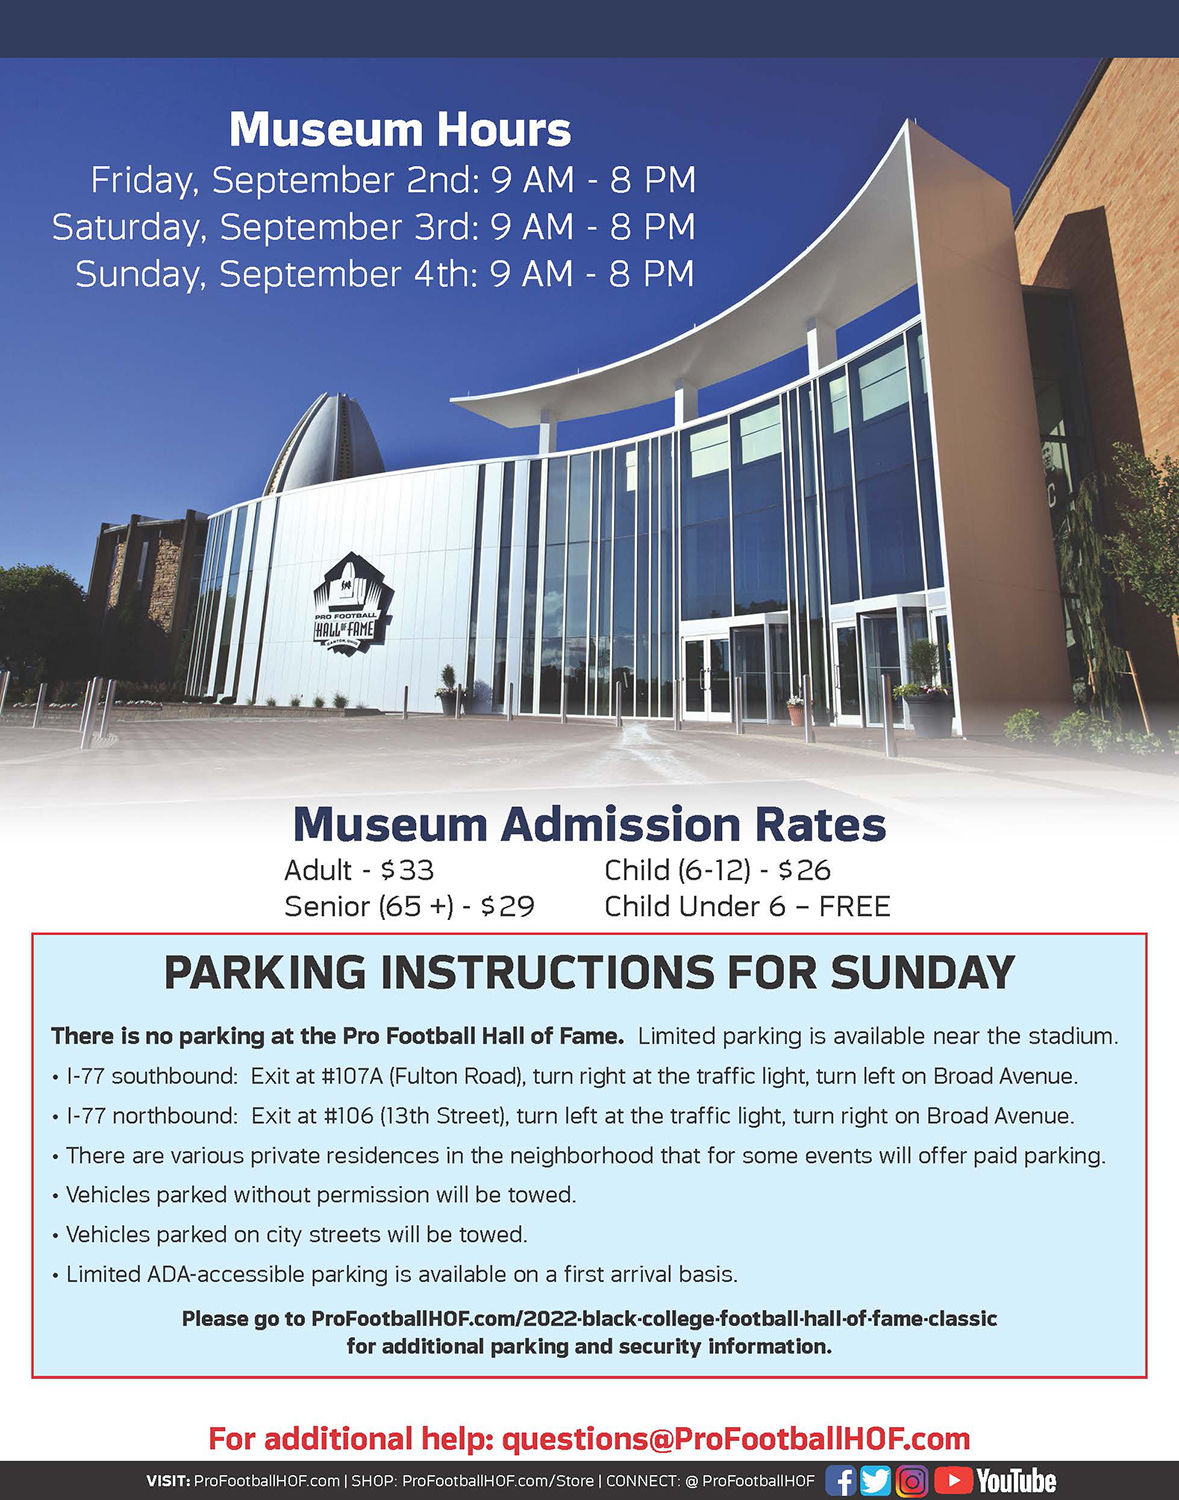 Pro Football Hall of Fame hours, rates and parking information